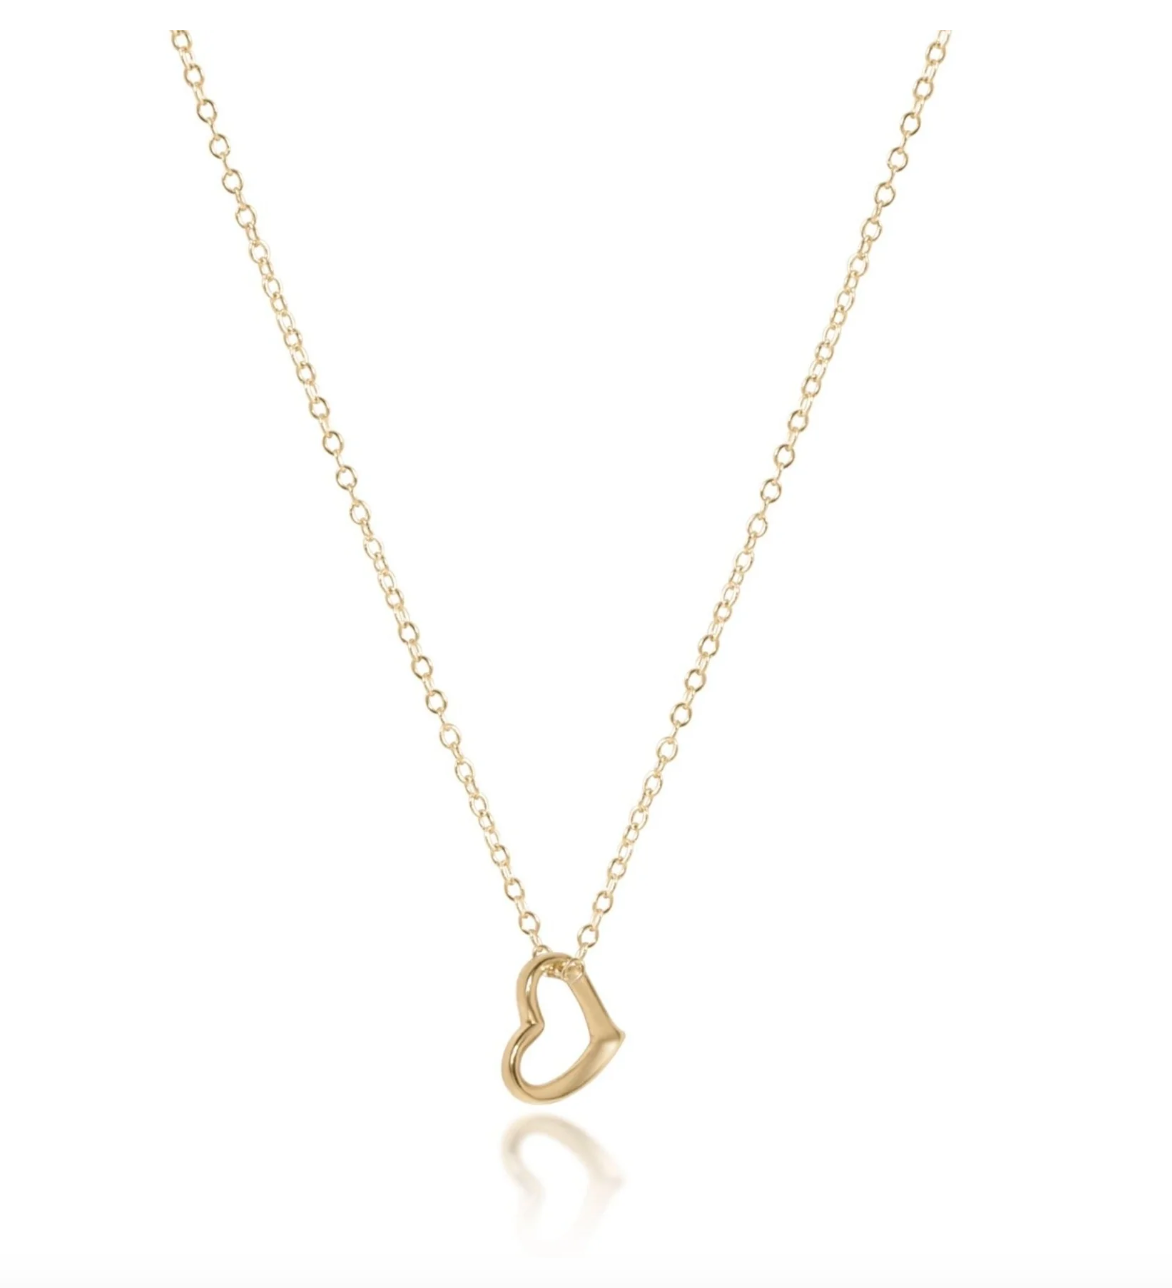 16" Necklace - Love Gold Charm